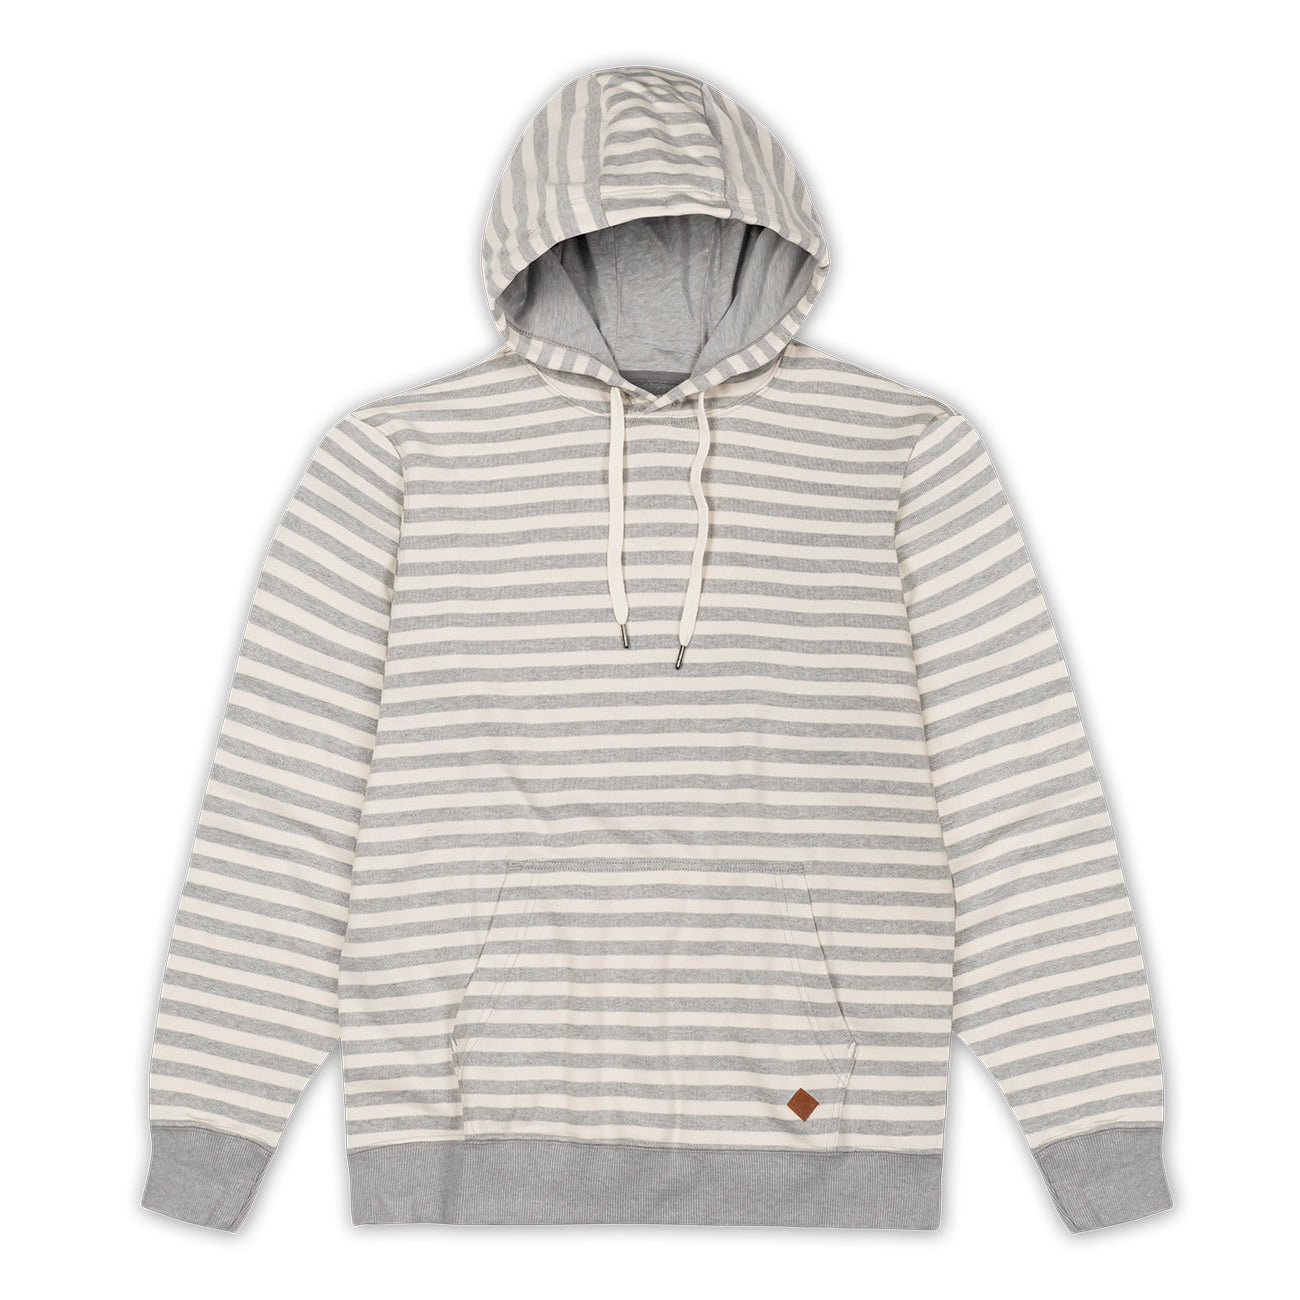 LOOPY LINES MCGEE - GREY/WHITE STRIPES